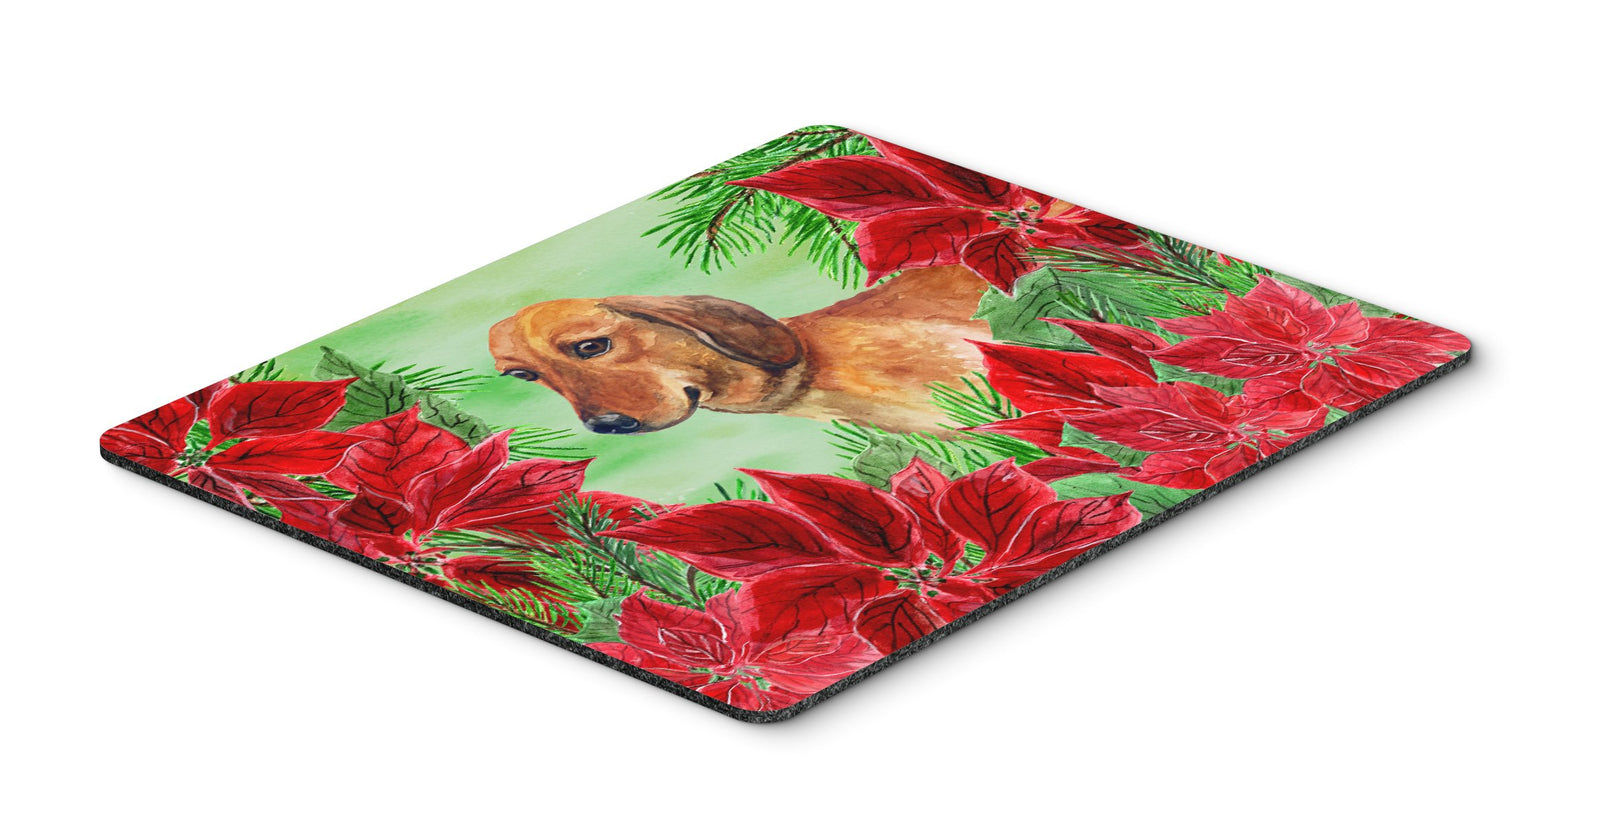 Dachshund Poinsettas Mouse Pad, Hot Pad or Trivet CK1300MP by Caroline's Treasures